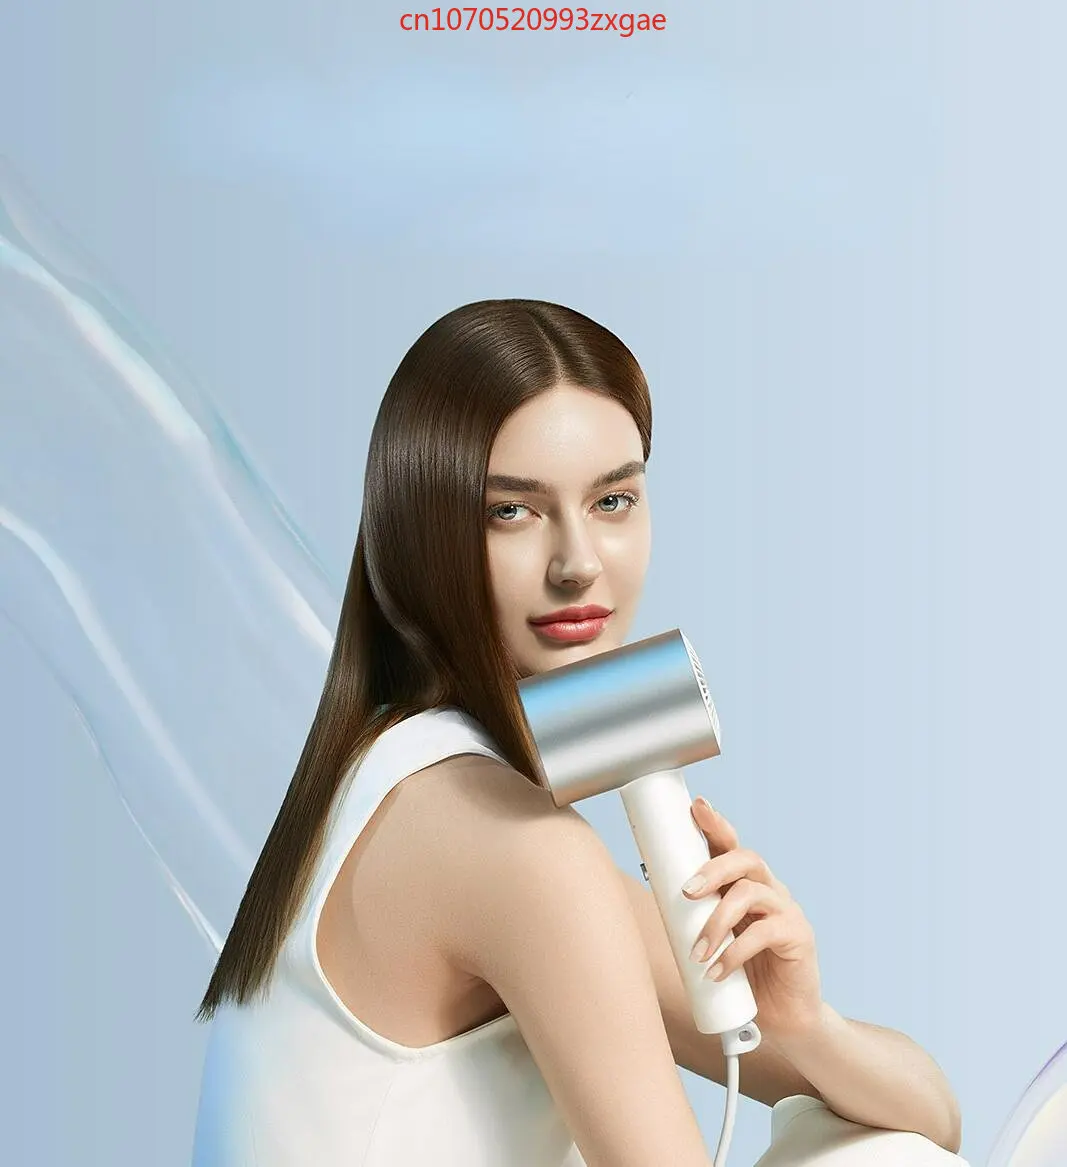 Xiaomi Mijia water ion hair dryer H500, water ion cooling and heating intelligent temperature control system Xiaomi hair dryer enlarge